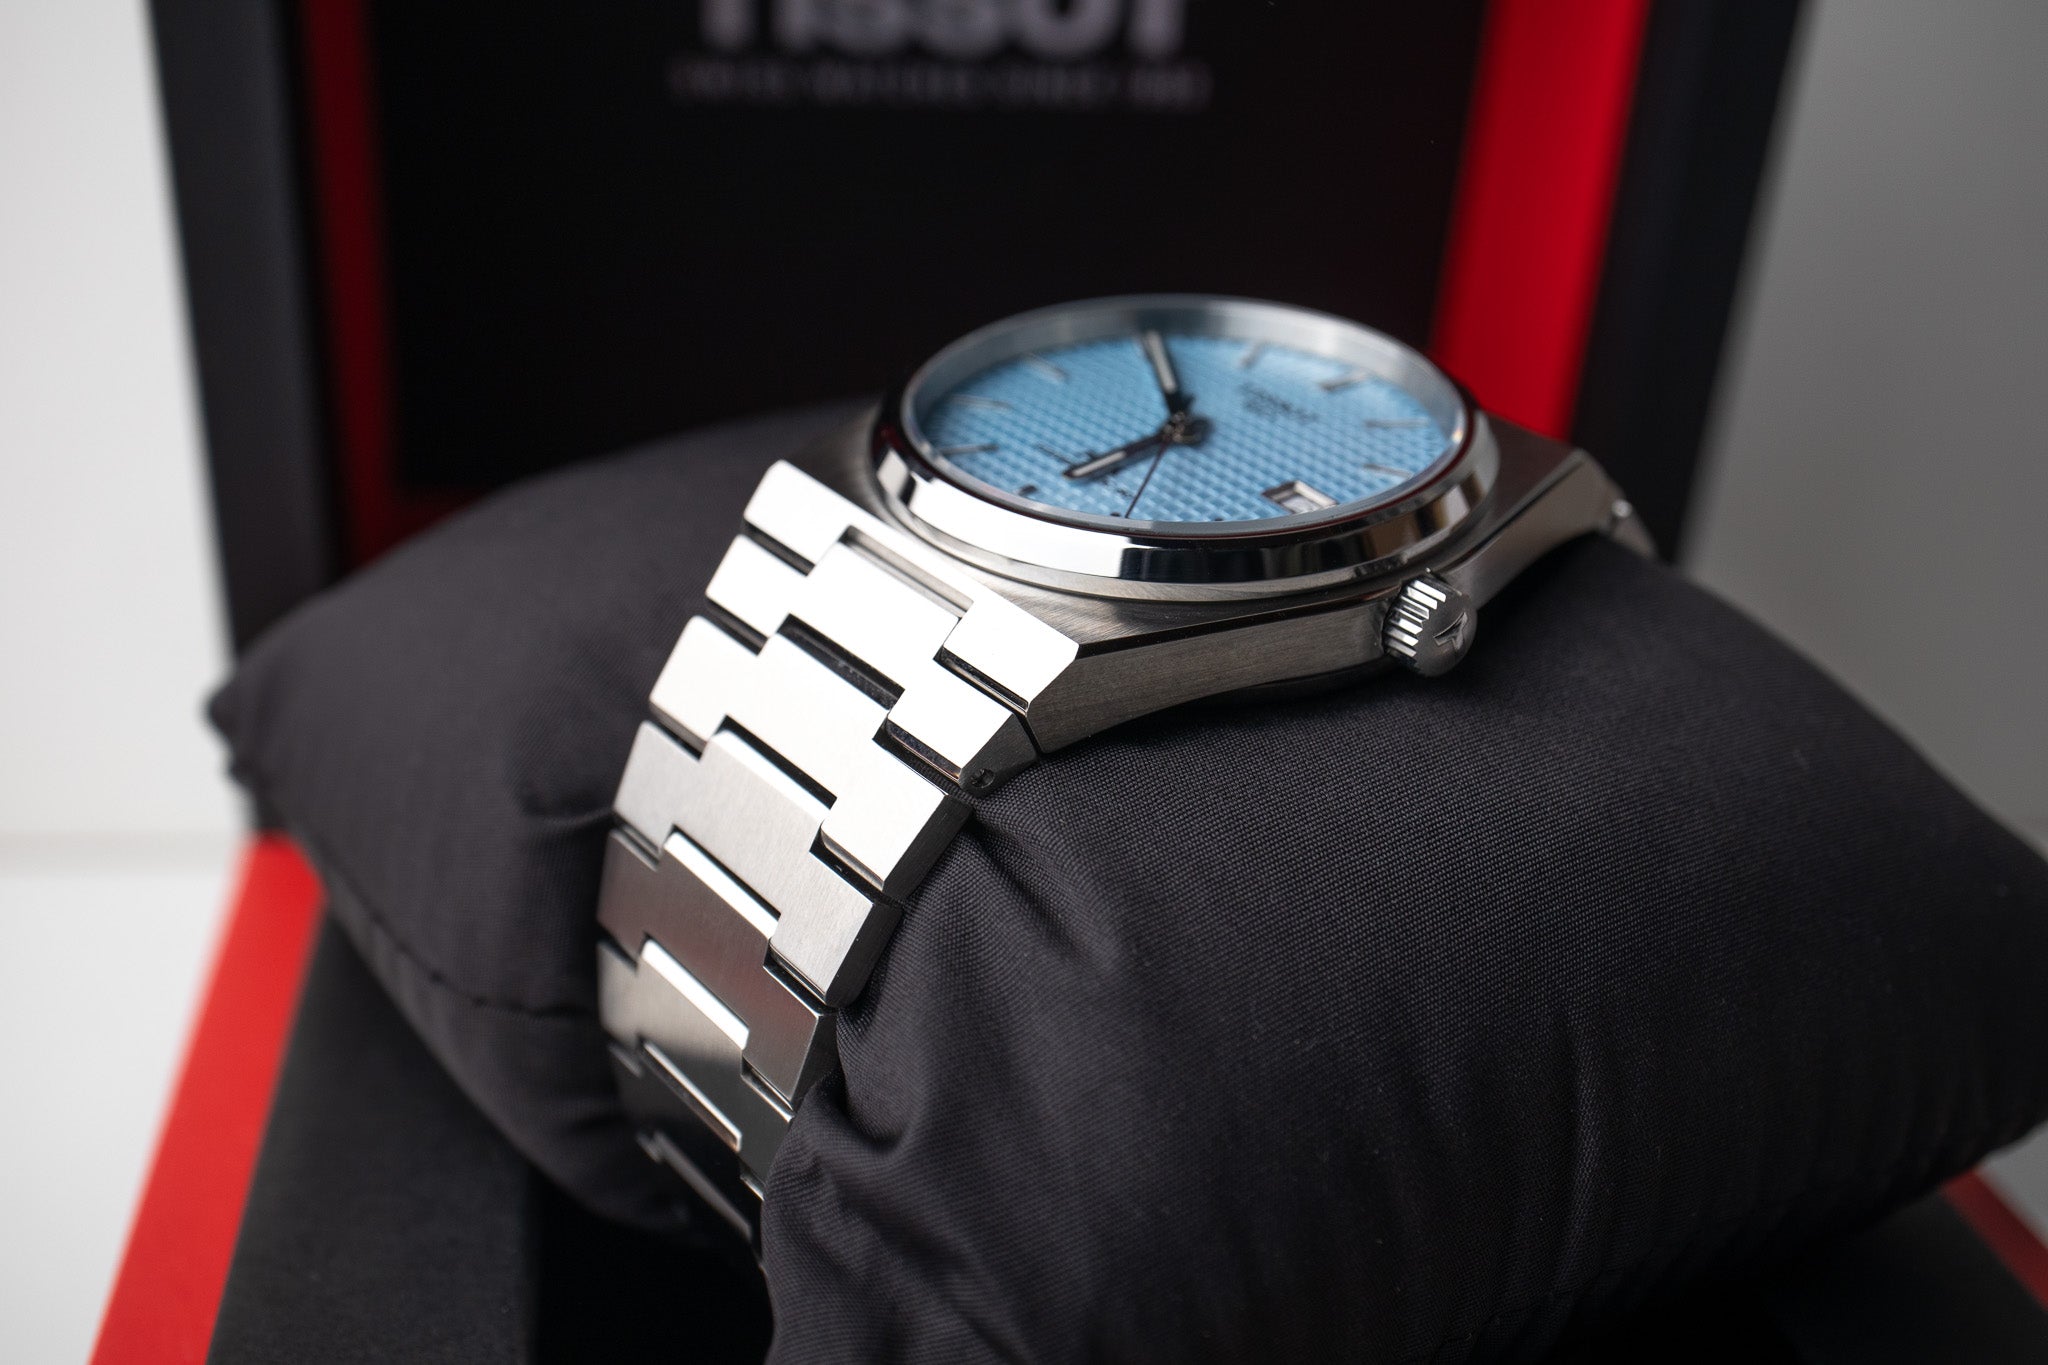 Tissot PRX Powermatic 80 reference T137.407.11.351.00 bottom right side of case and lugs with crown